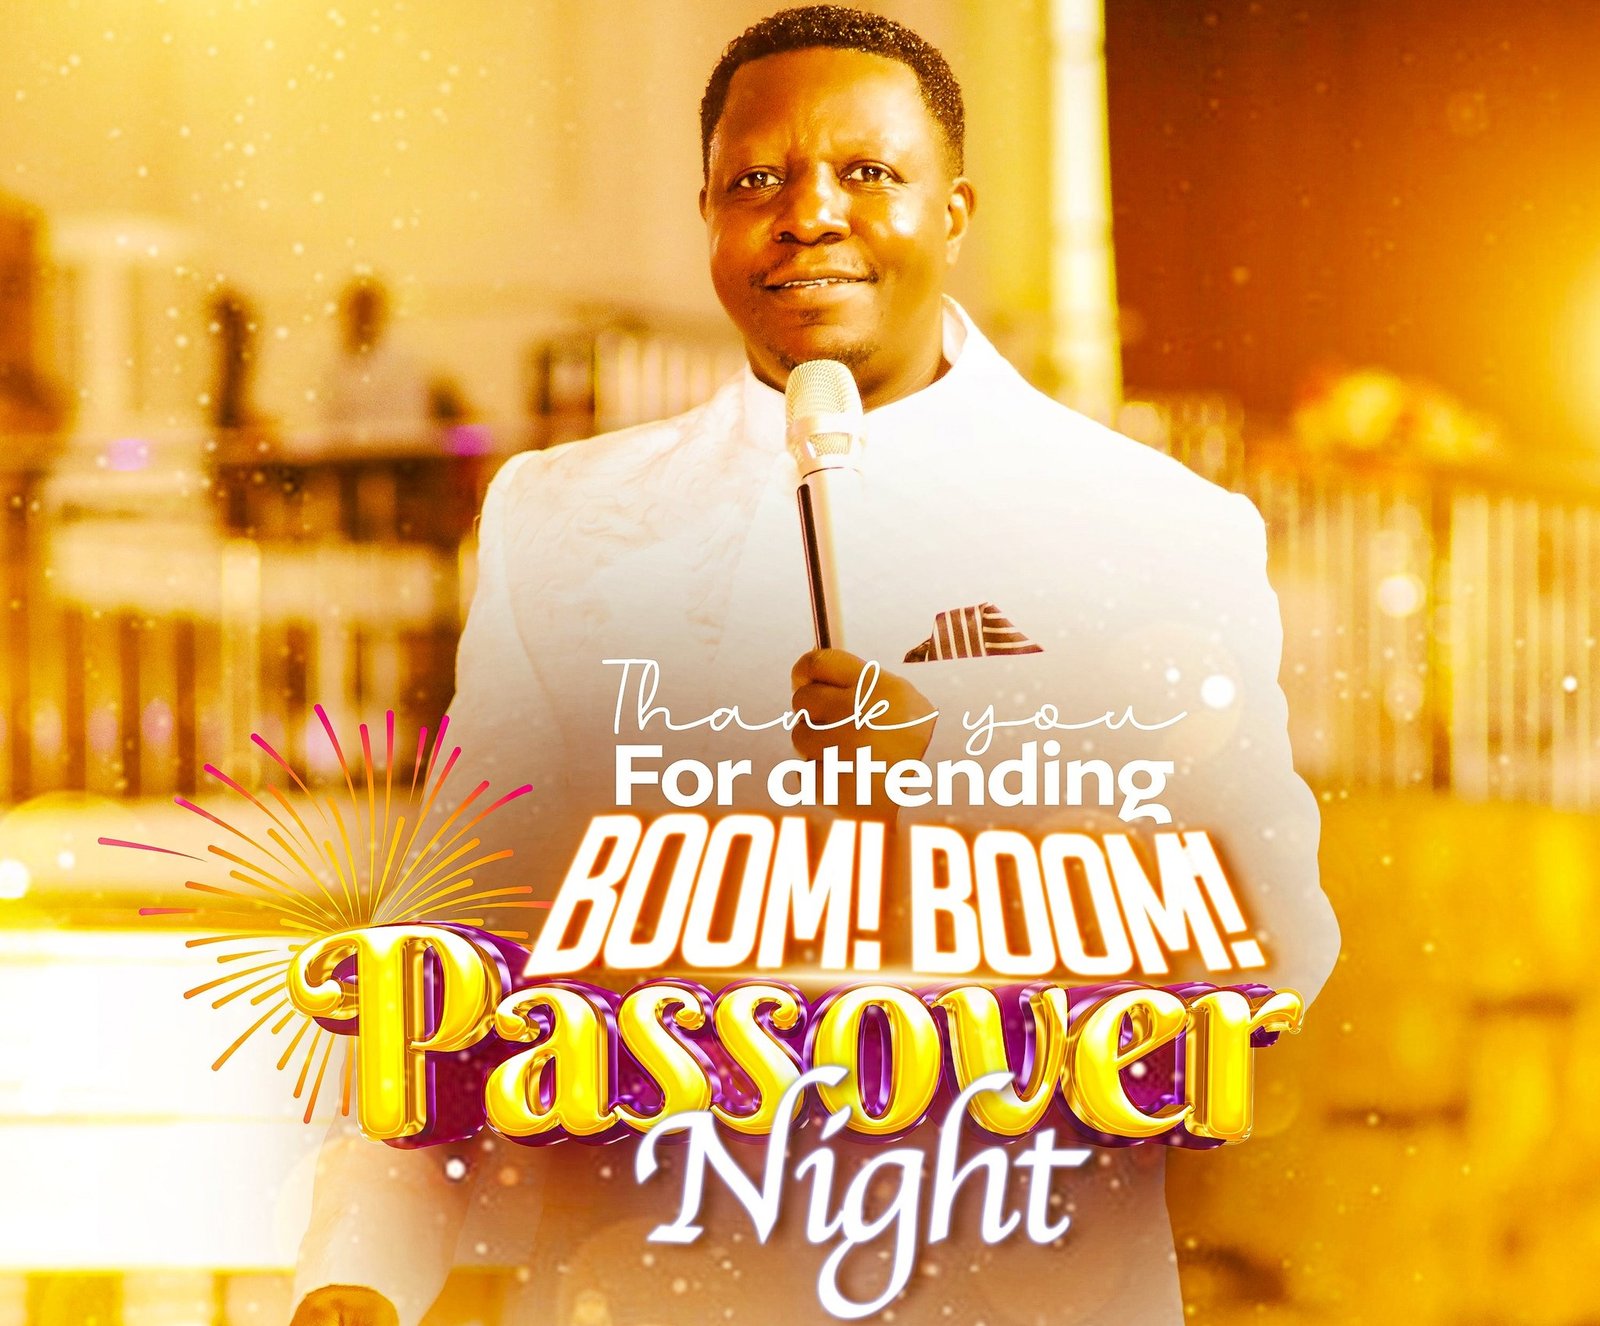 At Brother Ronnie's Holy City Entebbe, Passover Night was an incredibly miraculous night.